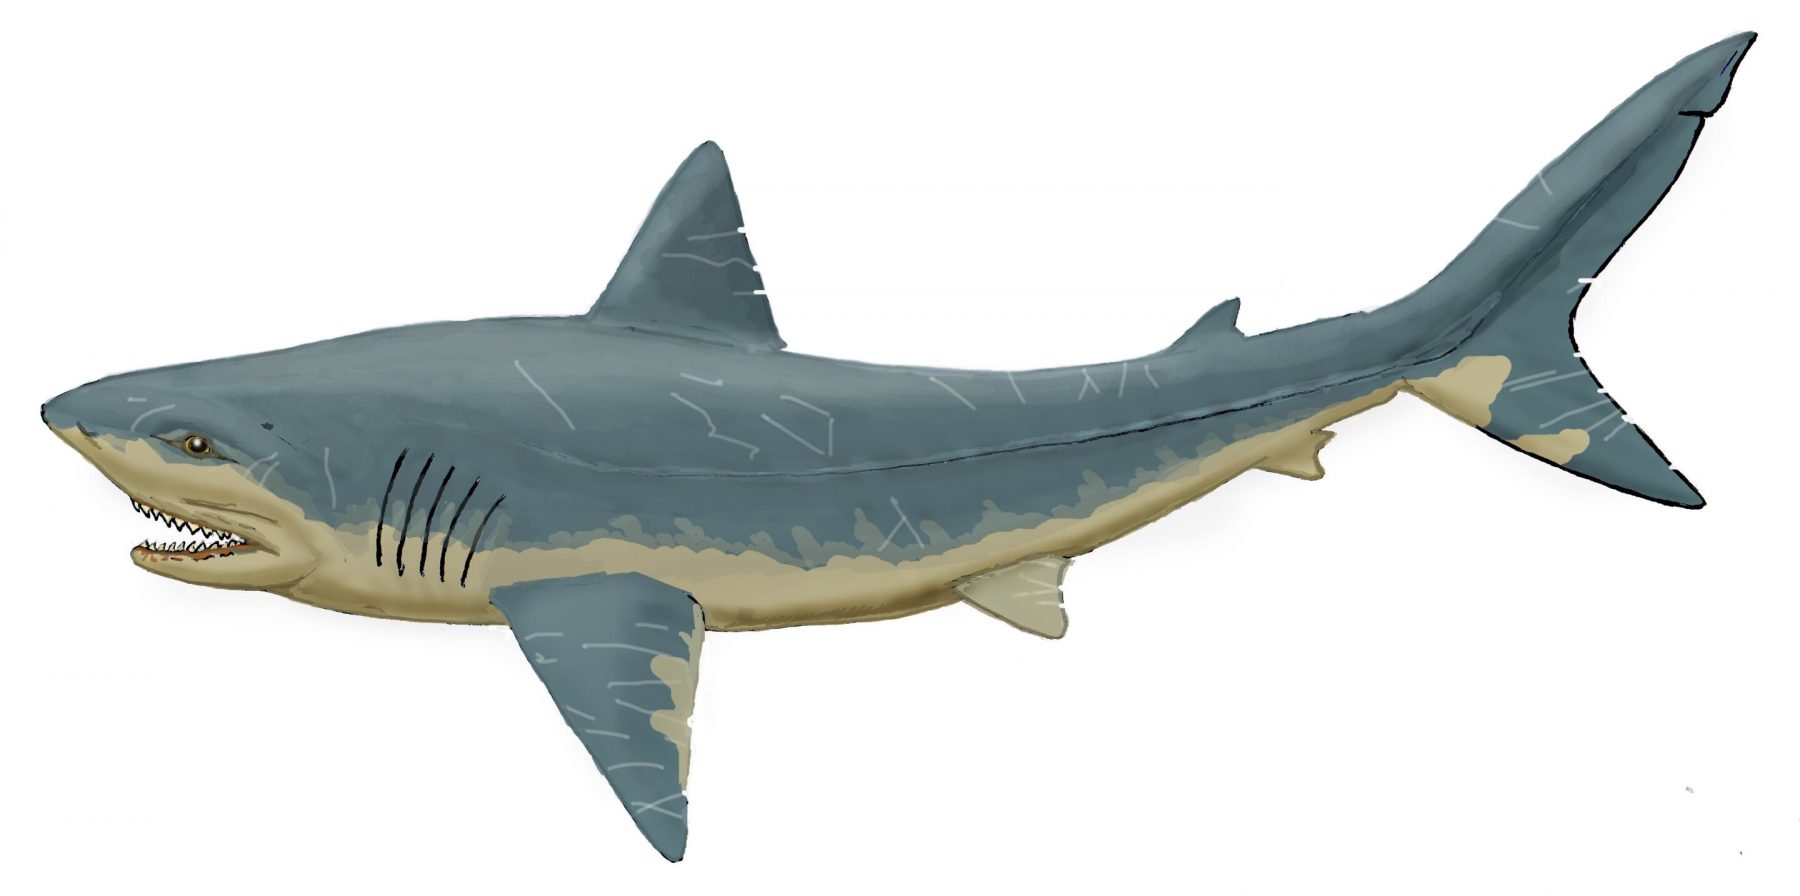 Artist's impression of a Squalicorax shark, which existed in the Late Cretaceous period. Credit: Dimitri Bogdanov